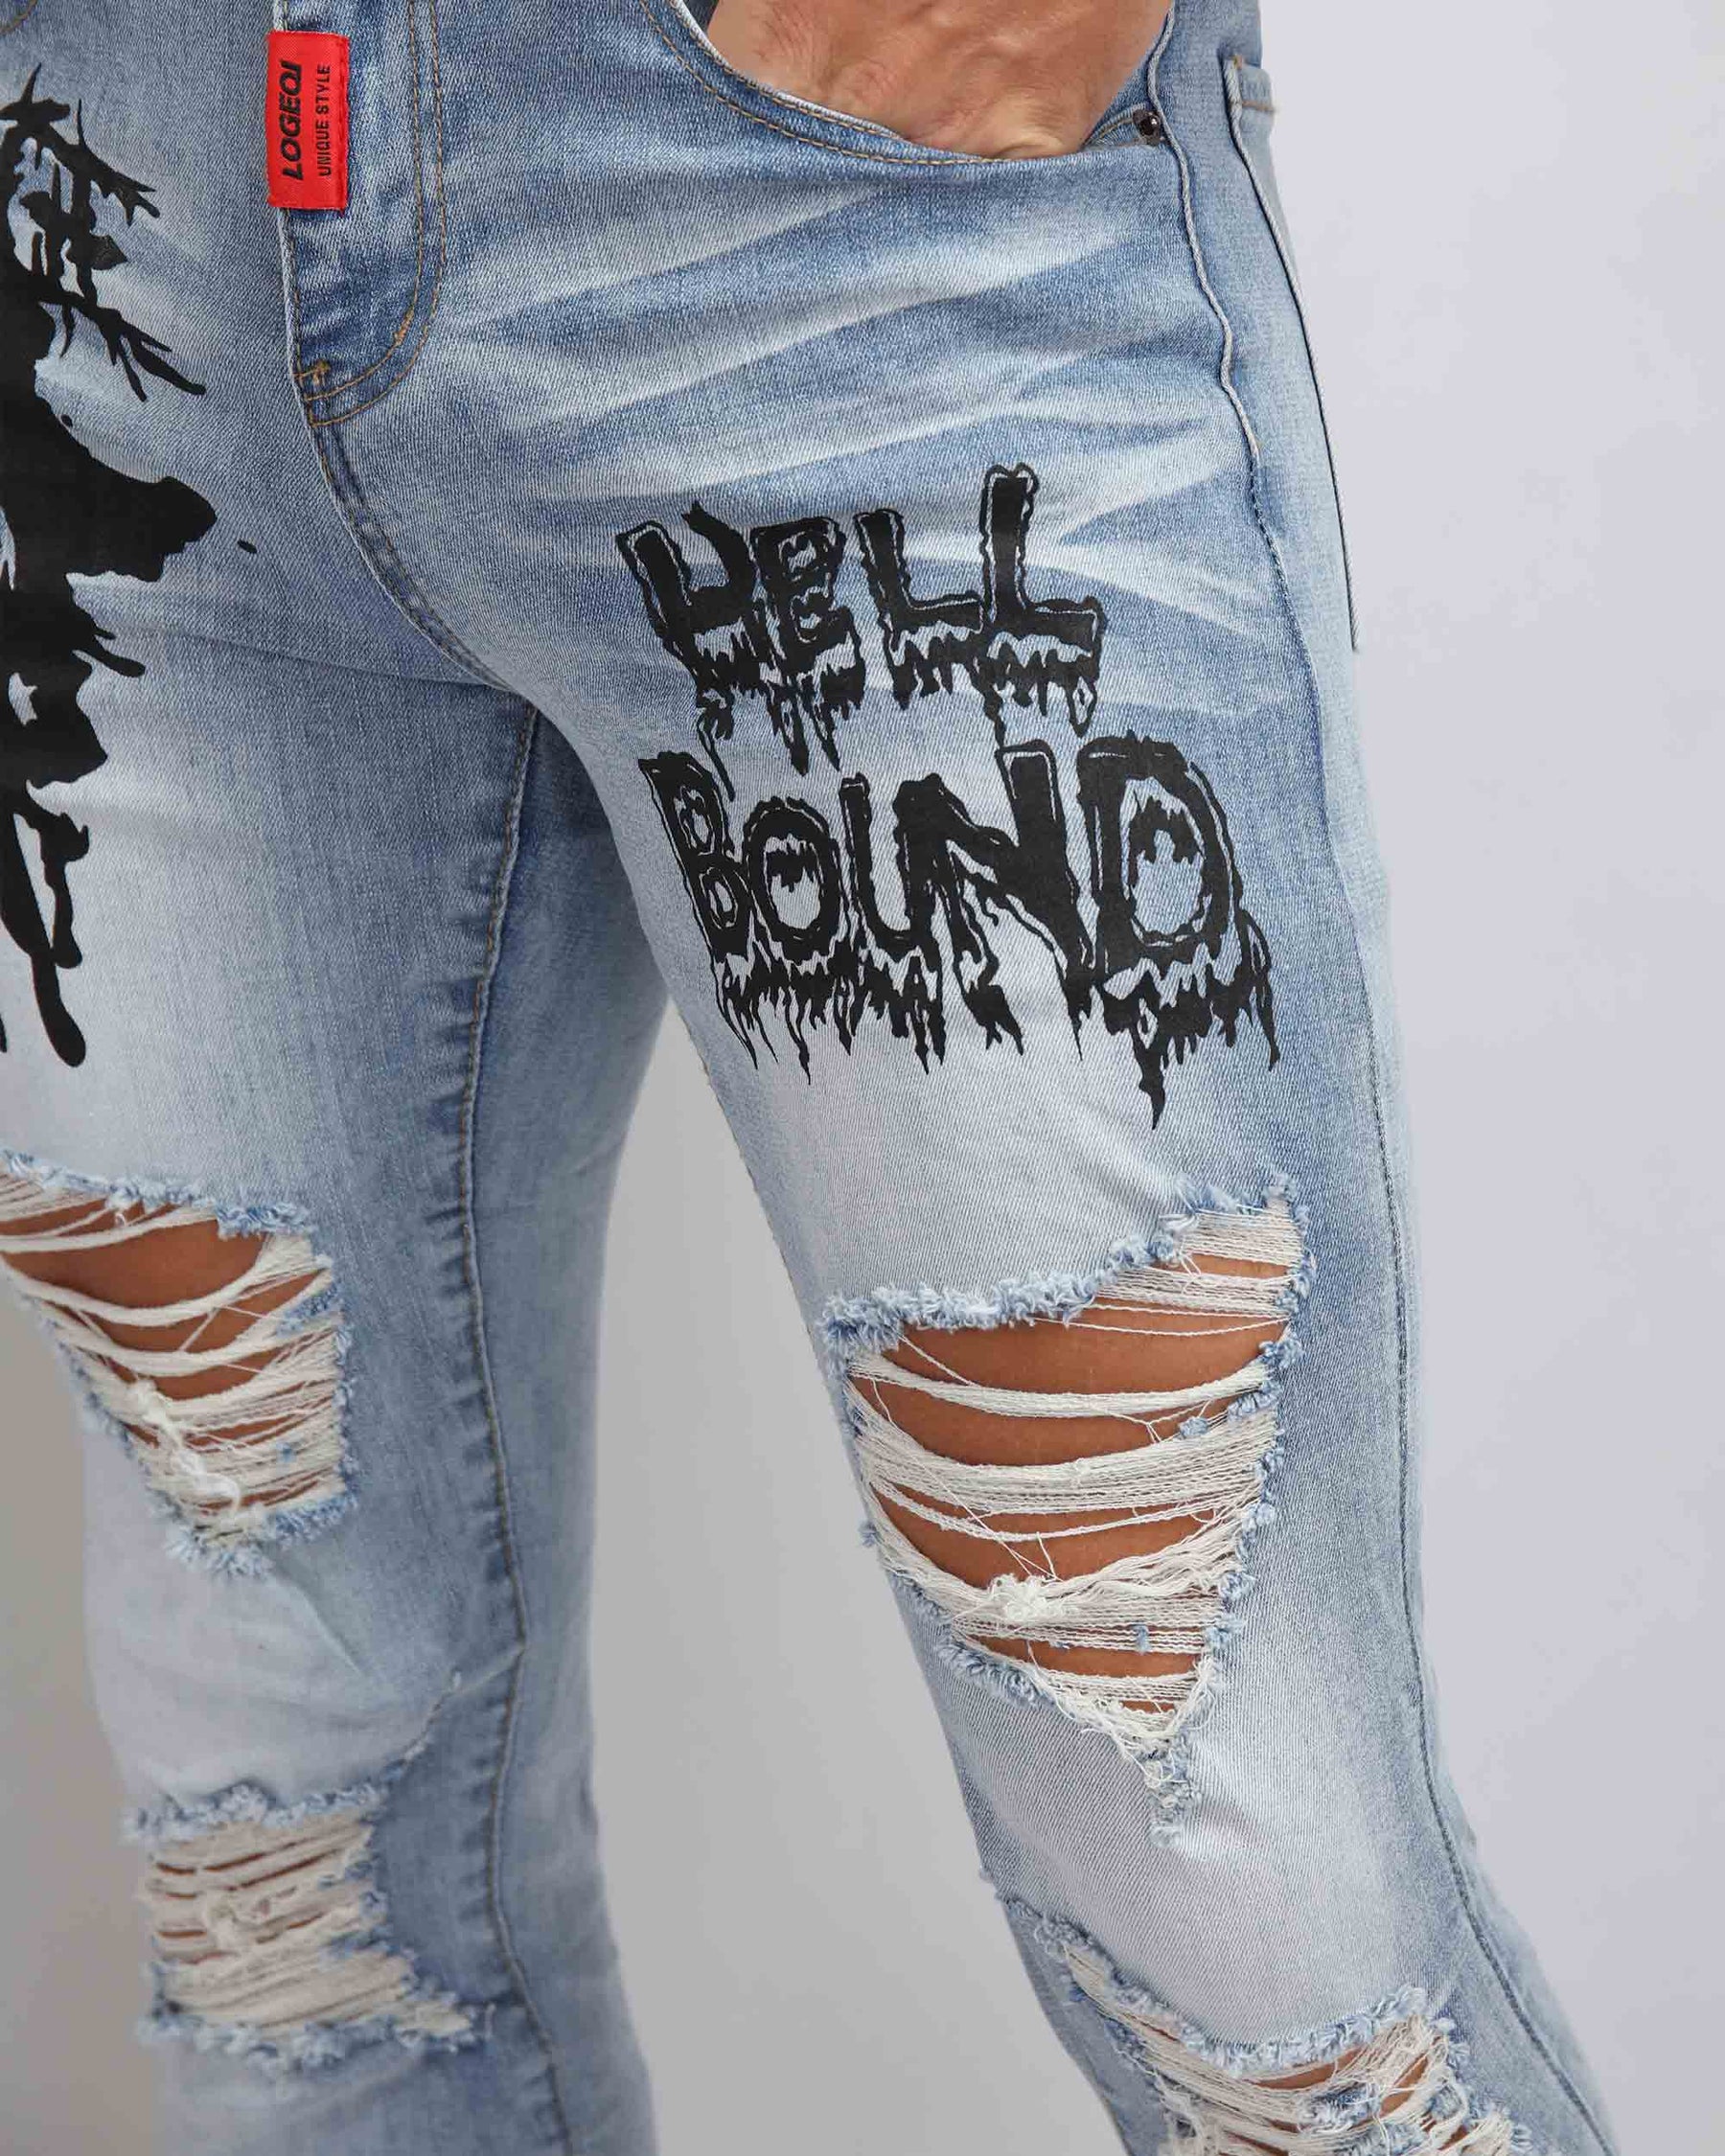 Large Ripped Blue Jeans with Skull Design